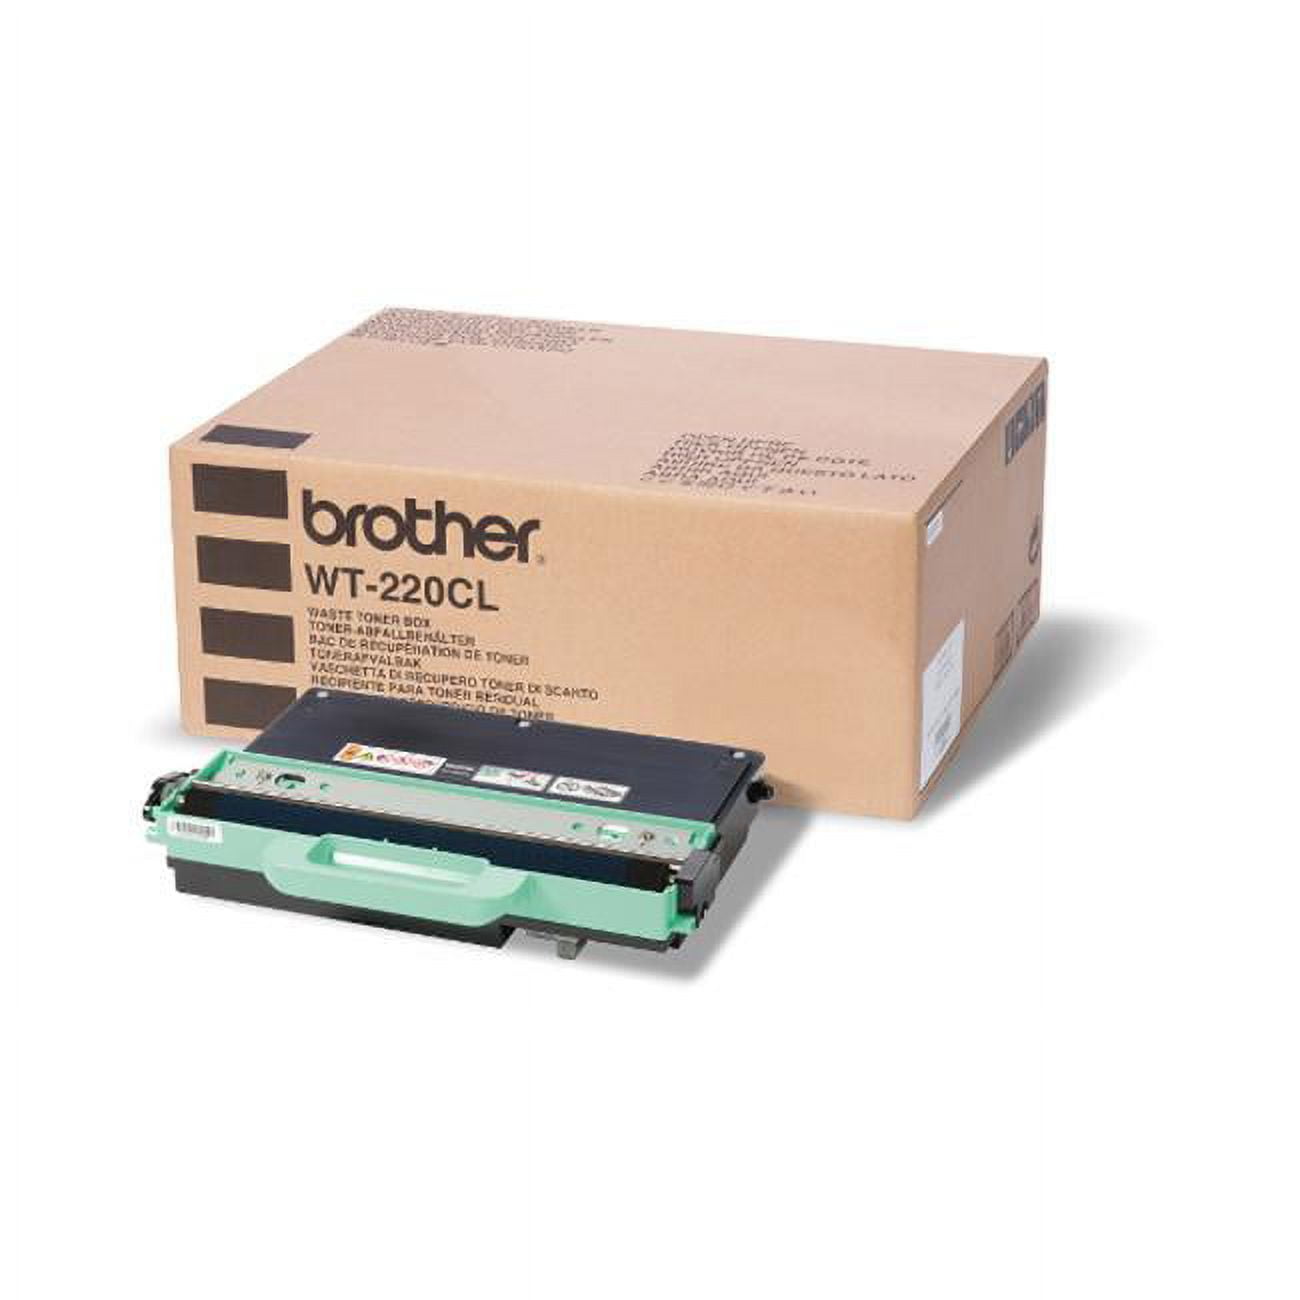 Picture of Brother WT-220CL-OEM Waste Toner Unit